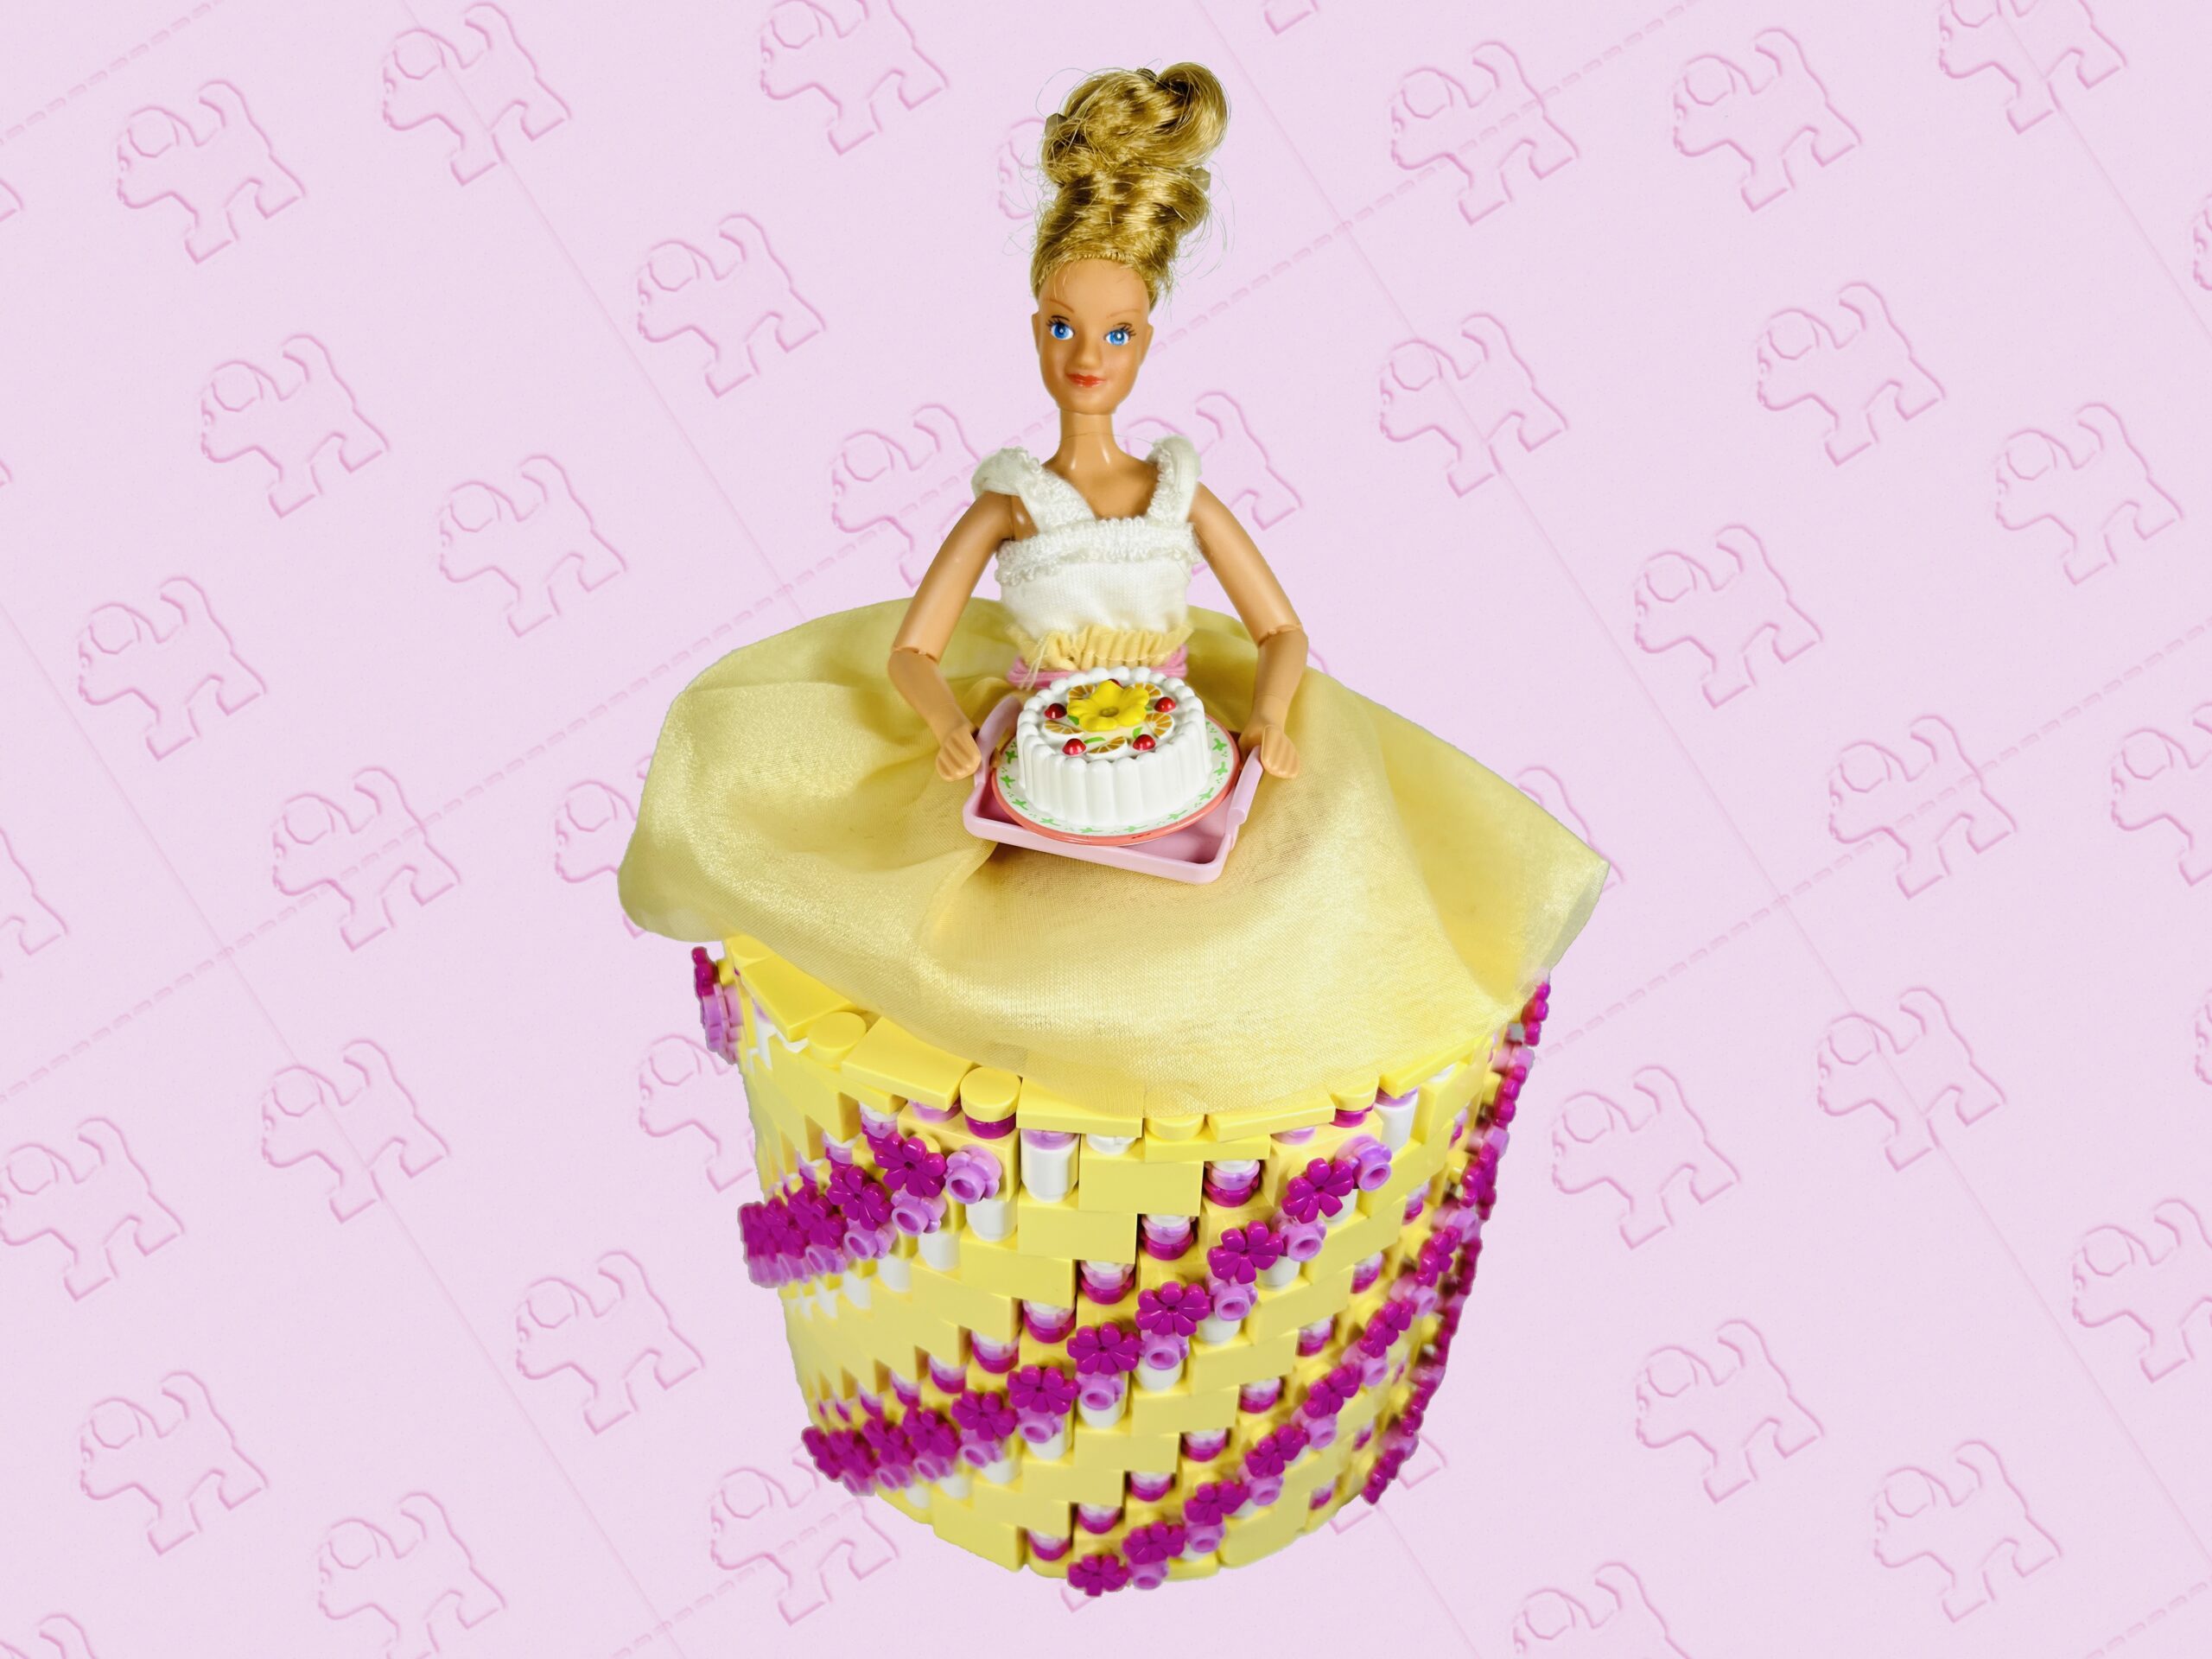 Blonde doll carrying a cake on a tray. She’s wearing a bright light yellow, bright pink and dark pink coloured brick-built toilet roll dress.